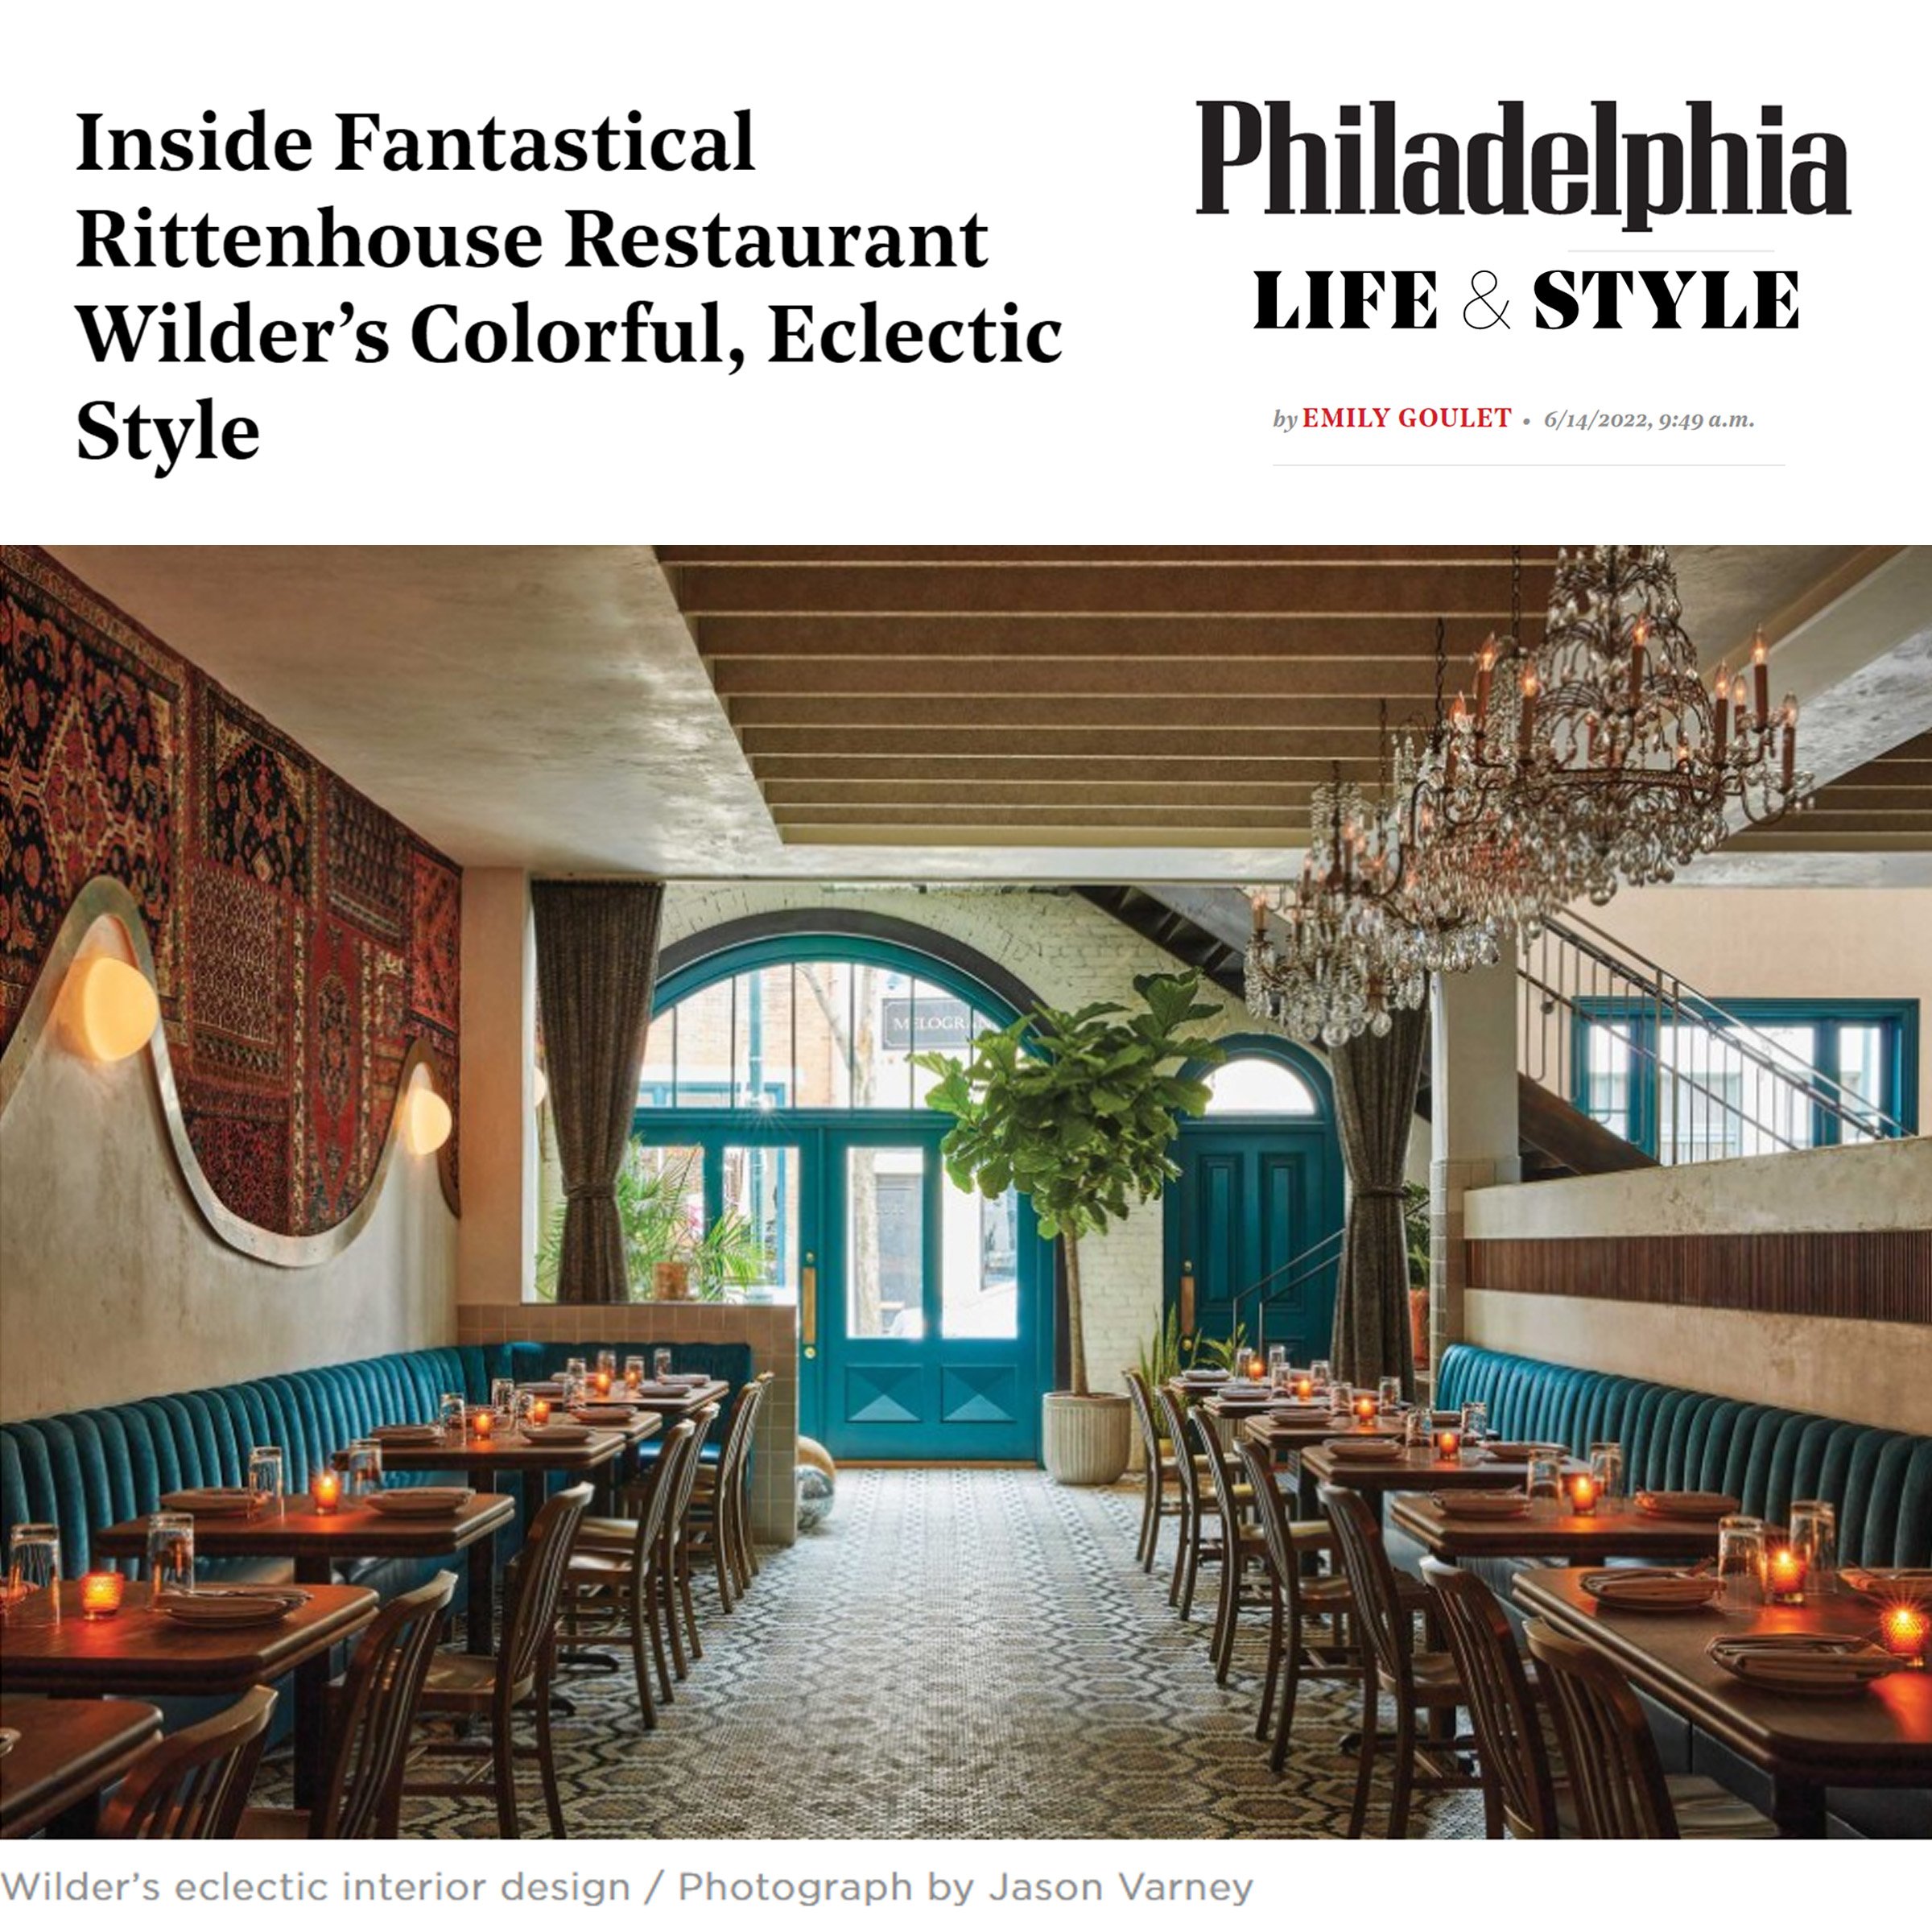 VELOCETTE STUDIO DESIGN FEATURED IN PHILLY MAG